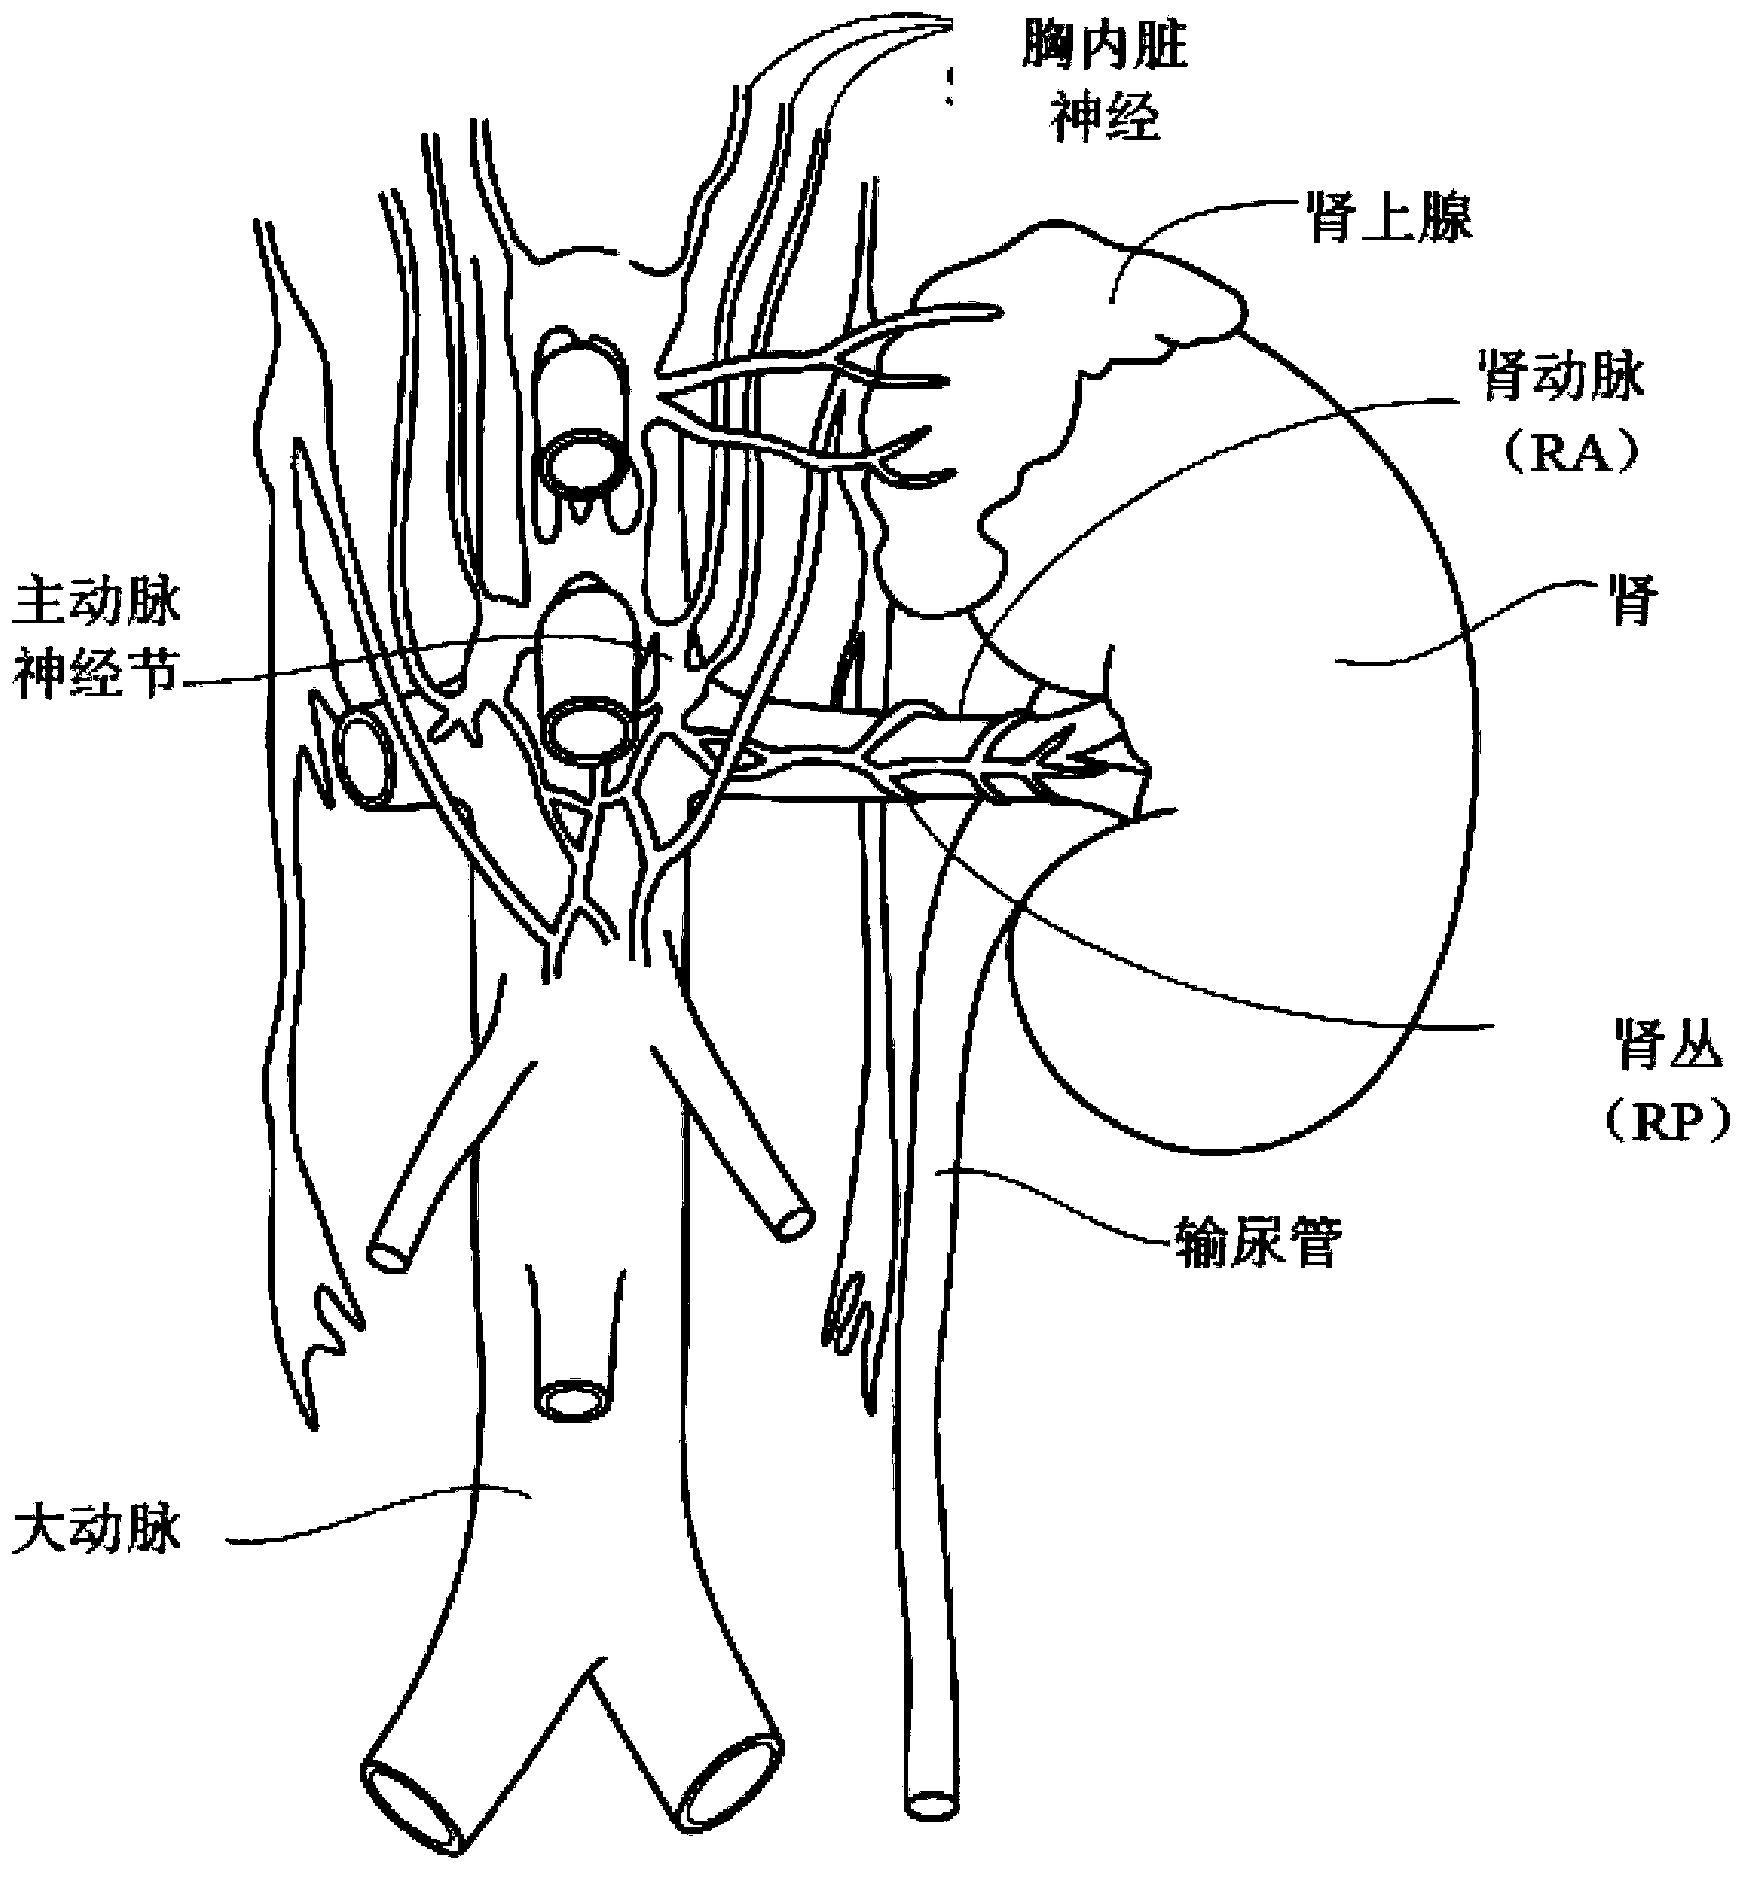 Cryoablation apparatuses, systems, and methods for renal neuromodulation